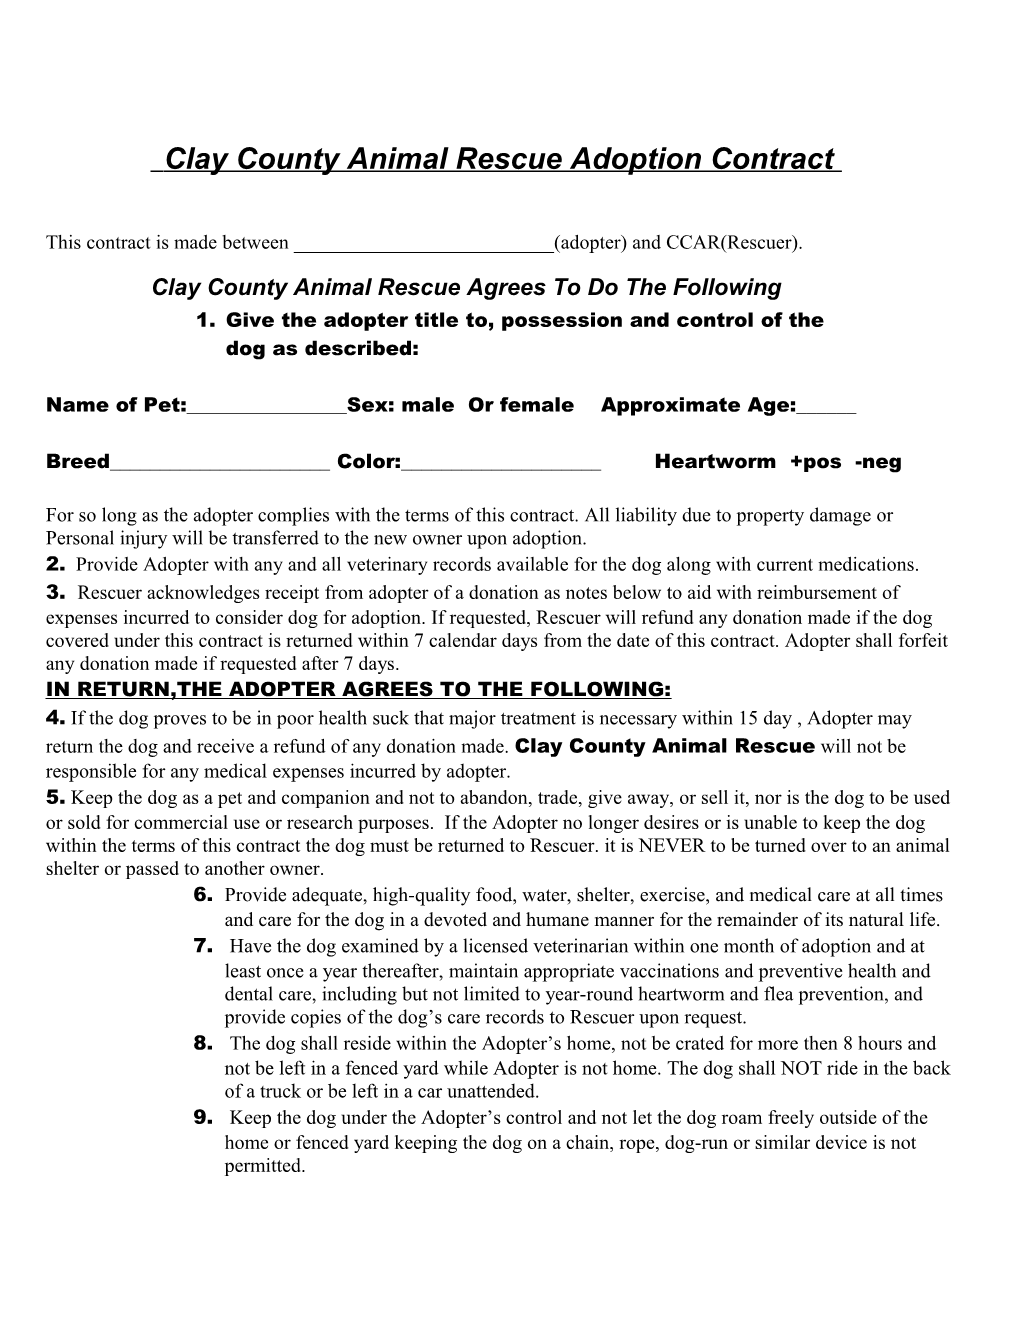 Clay County Animal Rescue Adoption Contract